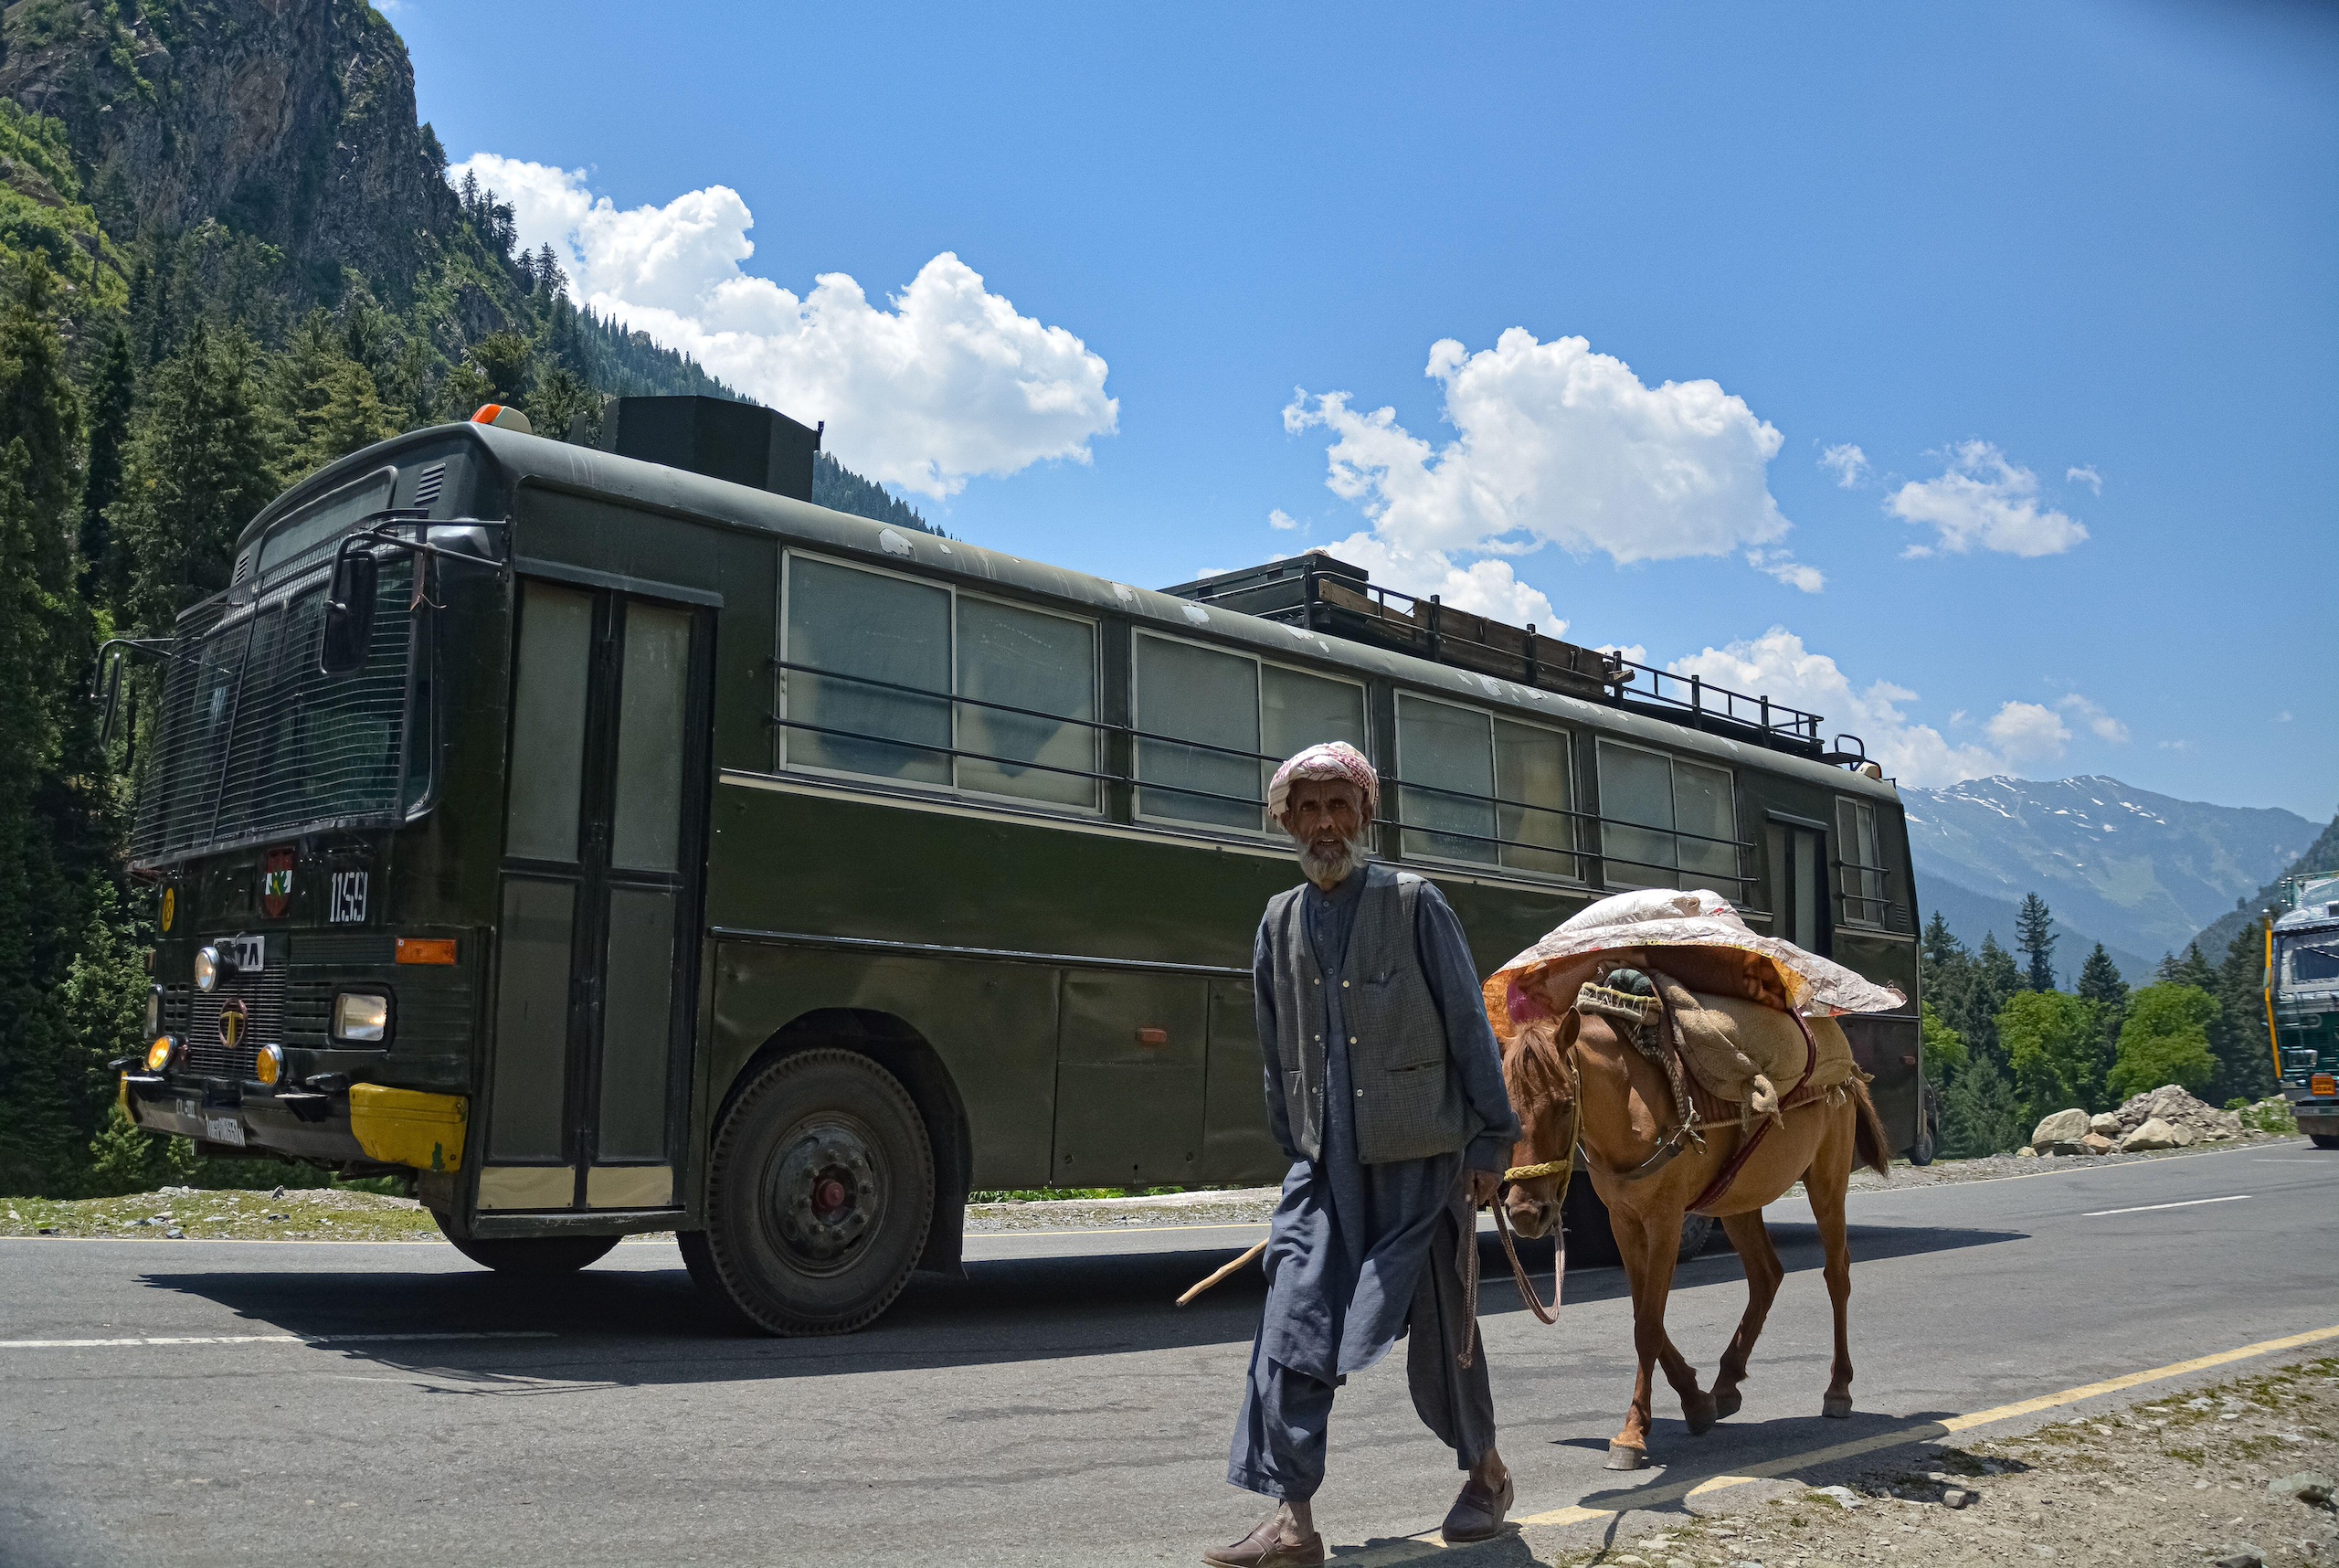 <p>An Indian army convoy drives along a highway leading to Ladakh, an area of the Himalayas with contested international borders. Increased military traffic and construction of roads, bridges and helipads in the name of security is disrupting the ecology and lives of people in the region. (Image: Musaib Mushtaq / Alamy)</p>